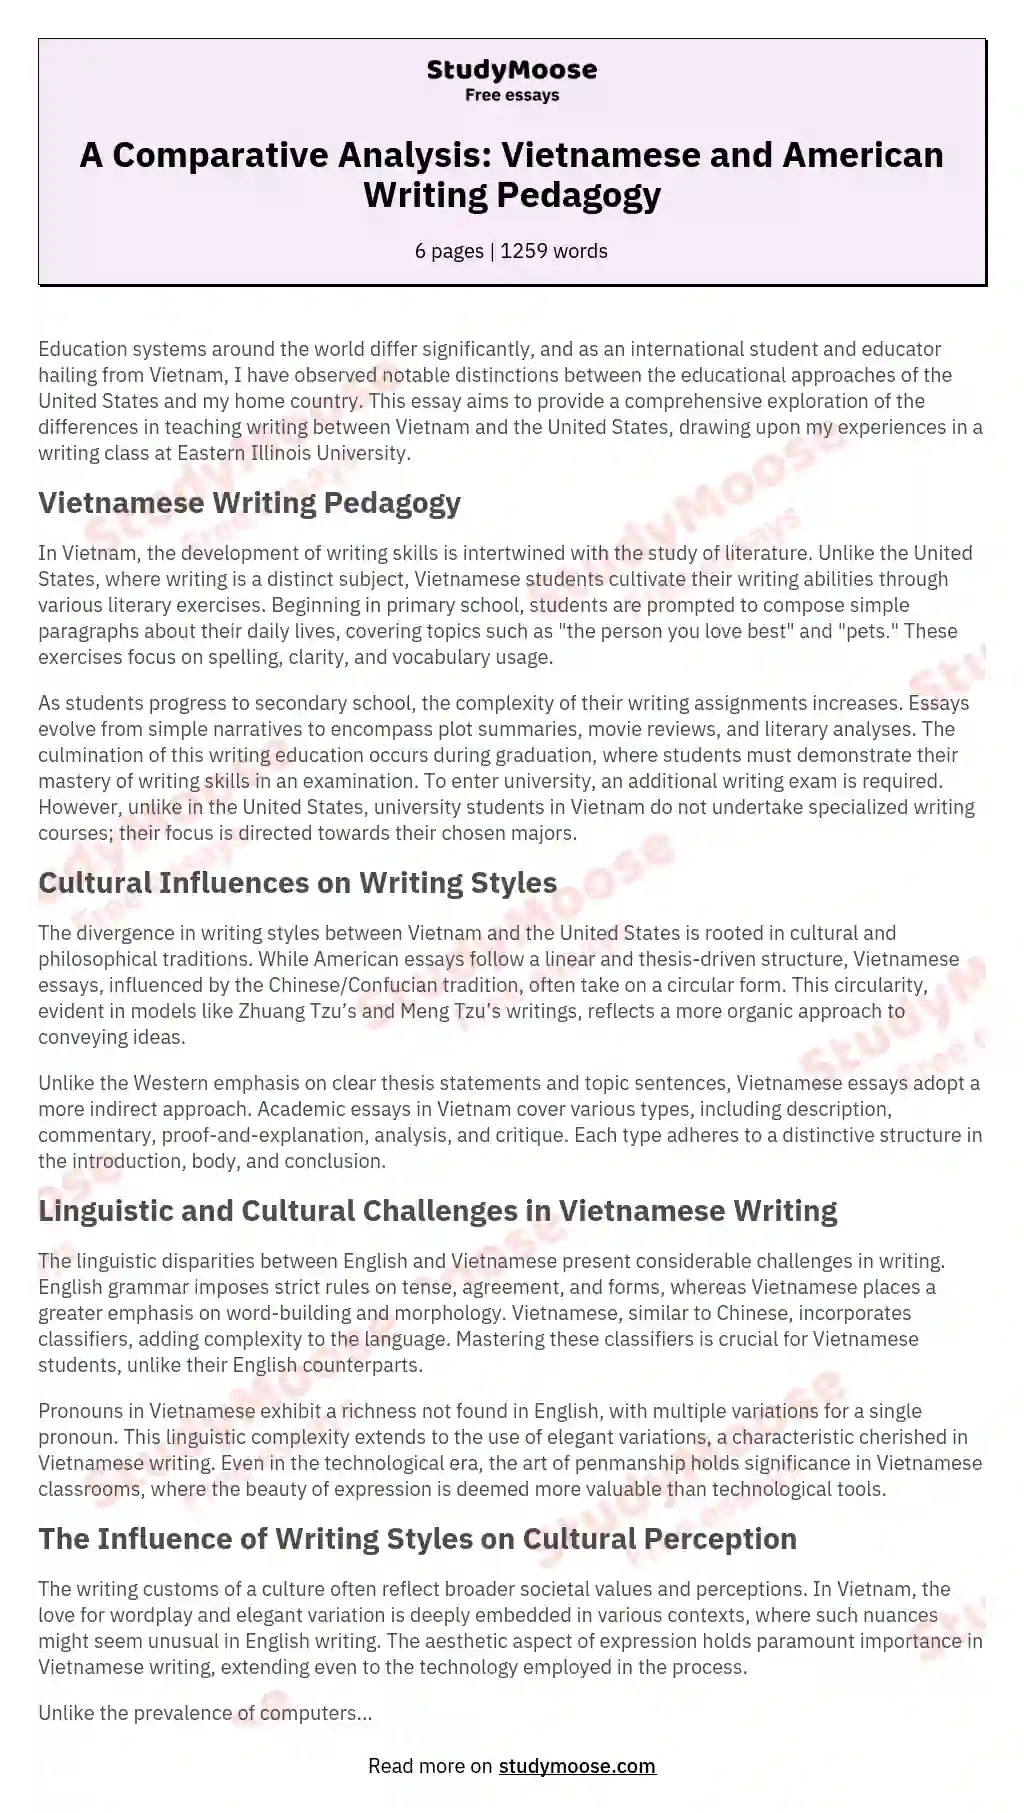 A Comparison of Vietnamese and American Writing-Pedagogy